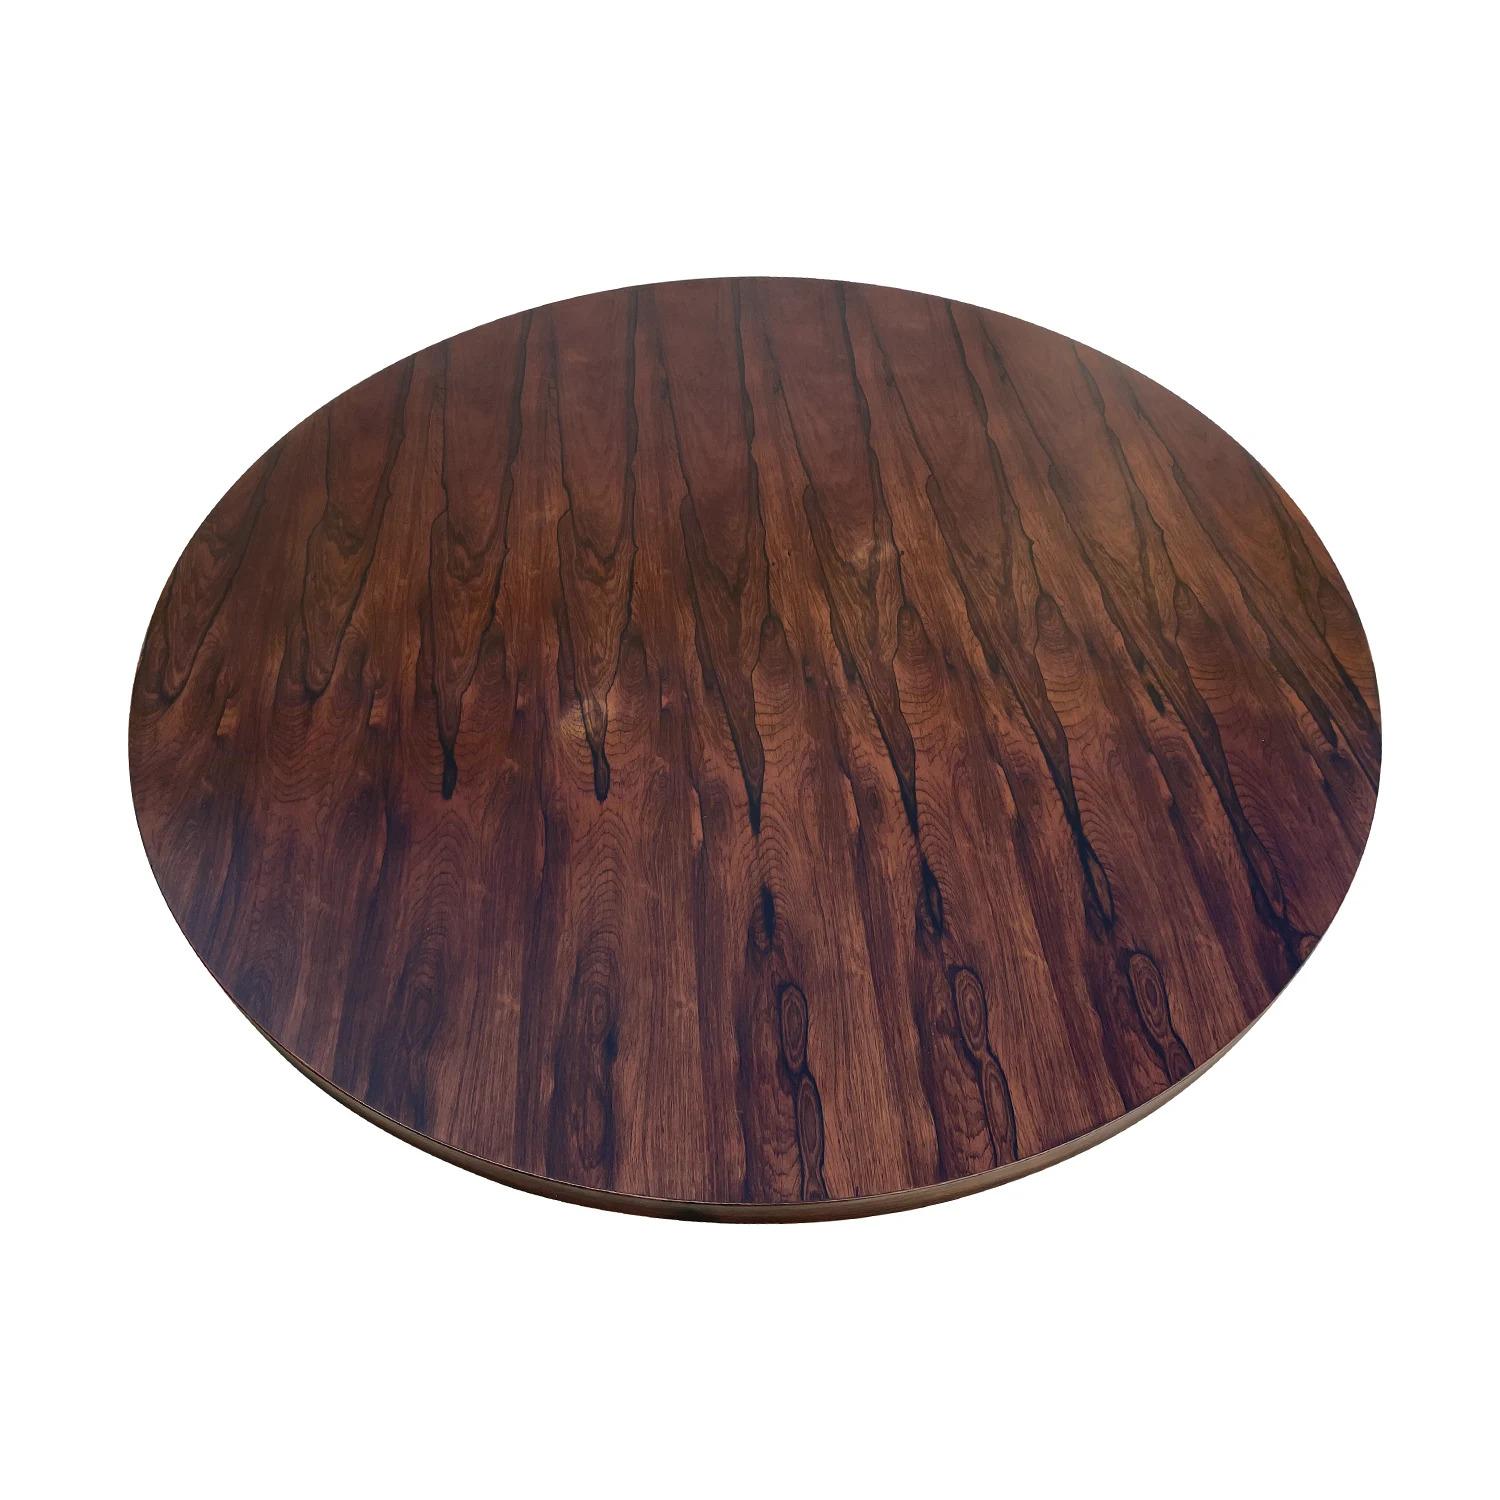 20th Century Italian Modern Vintage Polished Rosewood Dining, Center Table For Sale 3